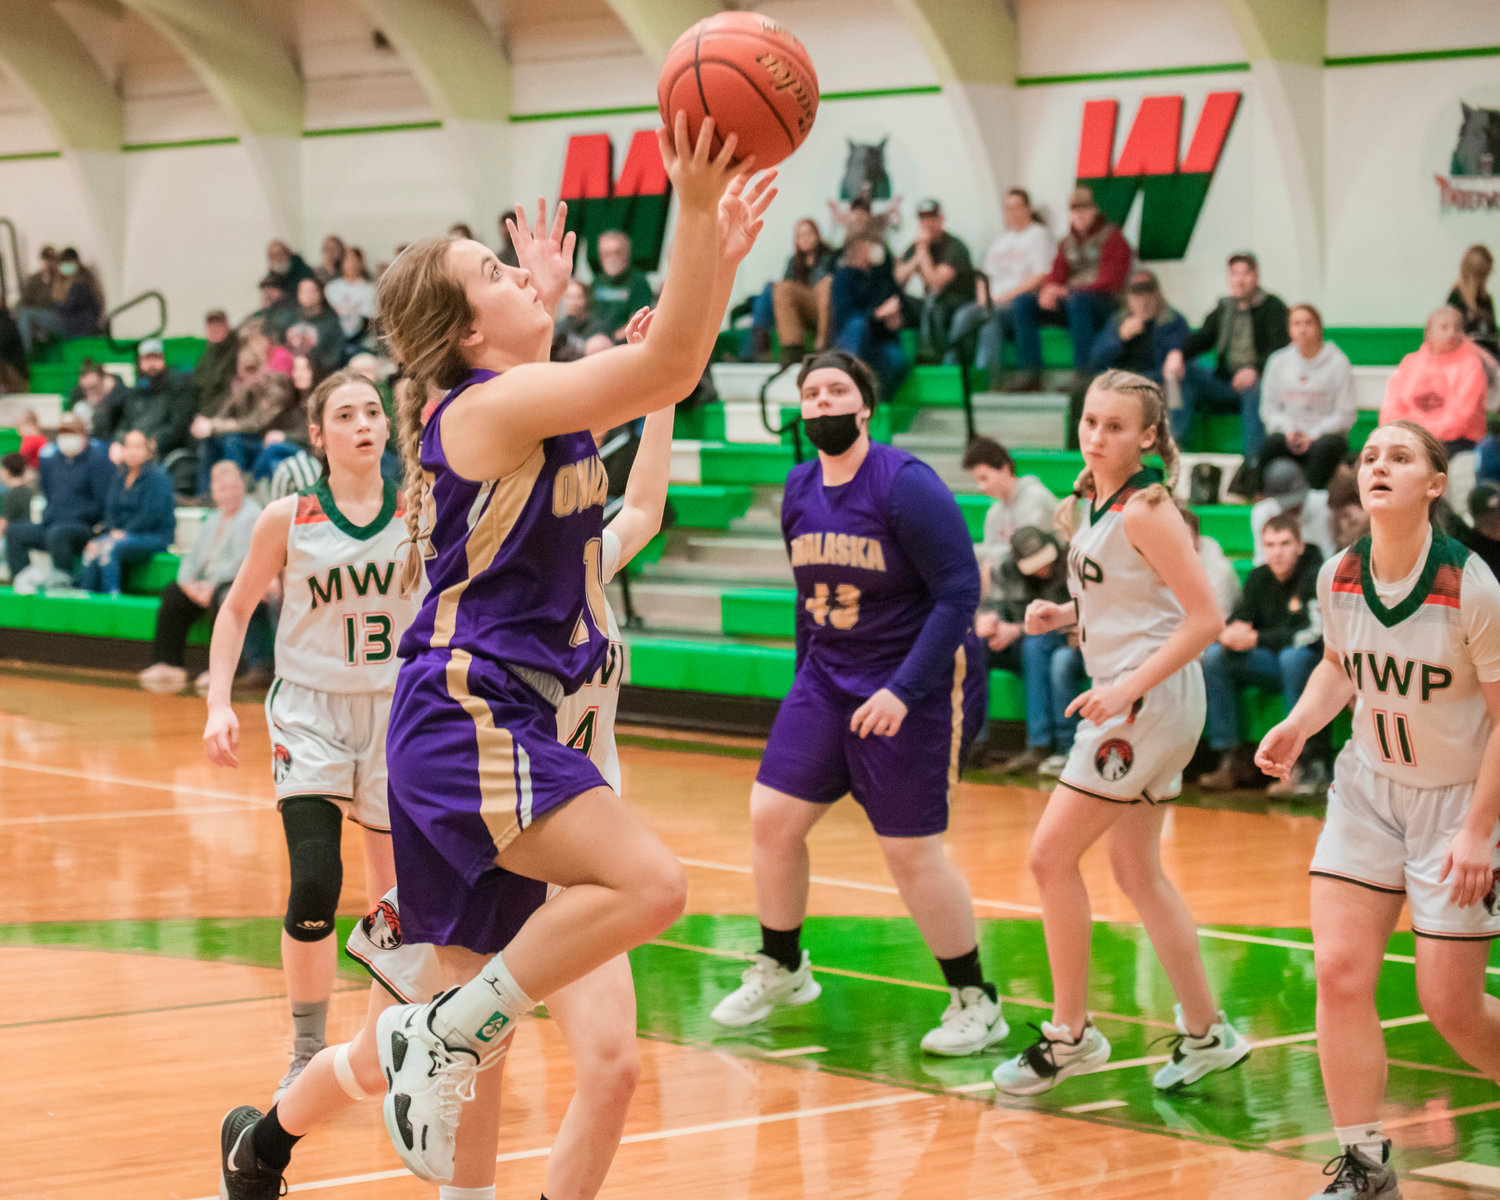 Onalaska’s Callie Lawrence (21) goes up with the ball during a game Saturday in Morton.